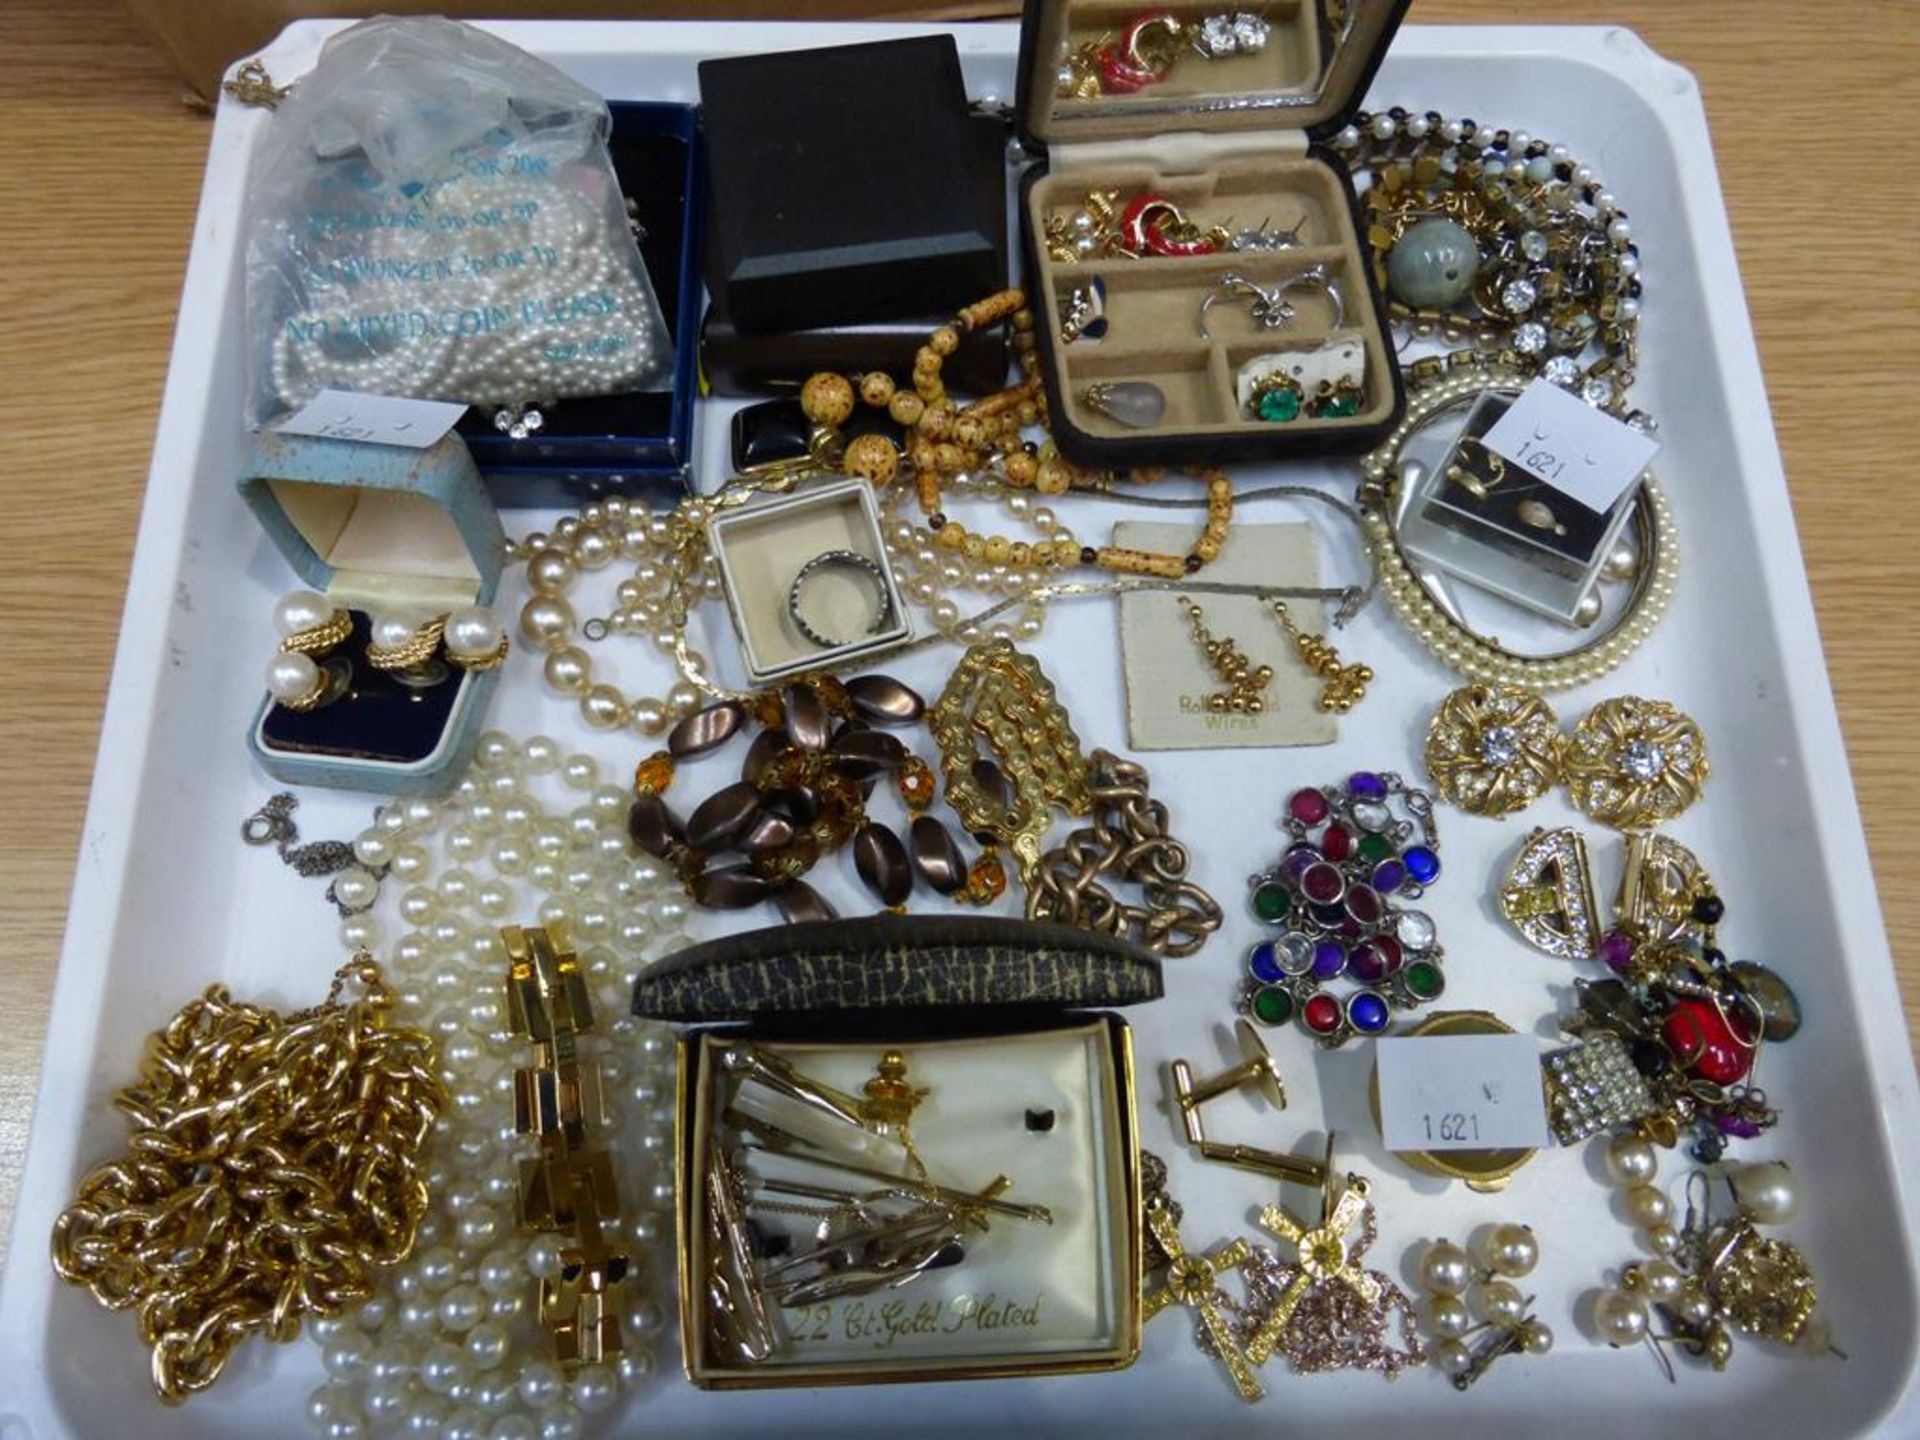 A selection of assorted Costume Jewellery including Necklaces, Earrings, Bracelets etc. (est £25-£